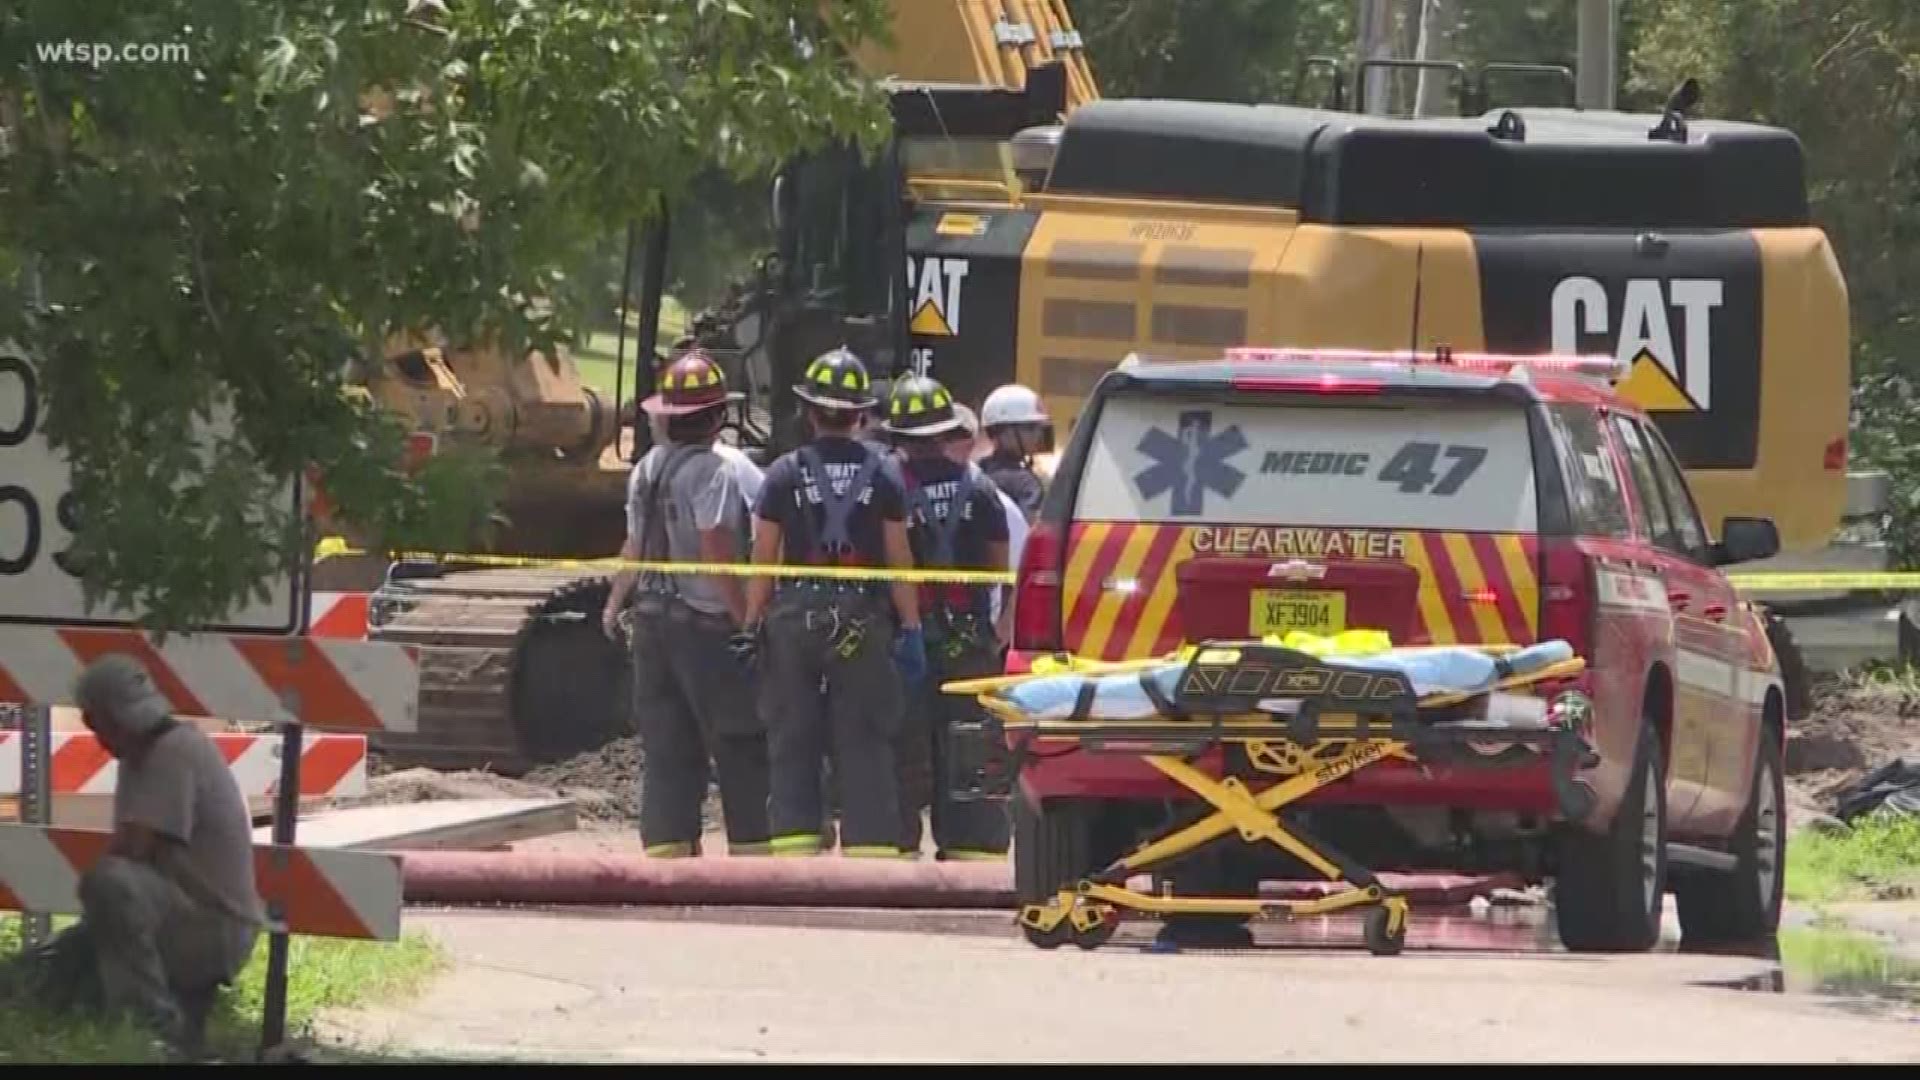 A stormwater project worker died when a large steel plate fell and crushed him in a trench.

It happened around 1 p.m. Monday while the man was working in the area of Hillcrest Avenue and Jeffords Street, police spokeswoman Joelle Castelli said.

The man was in his mid 30s. According to investigators, the steel plate was being used as part of a culvert box system to remove stormwater from the neighborhood and helped to stabilize the trench.